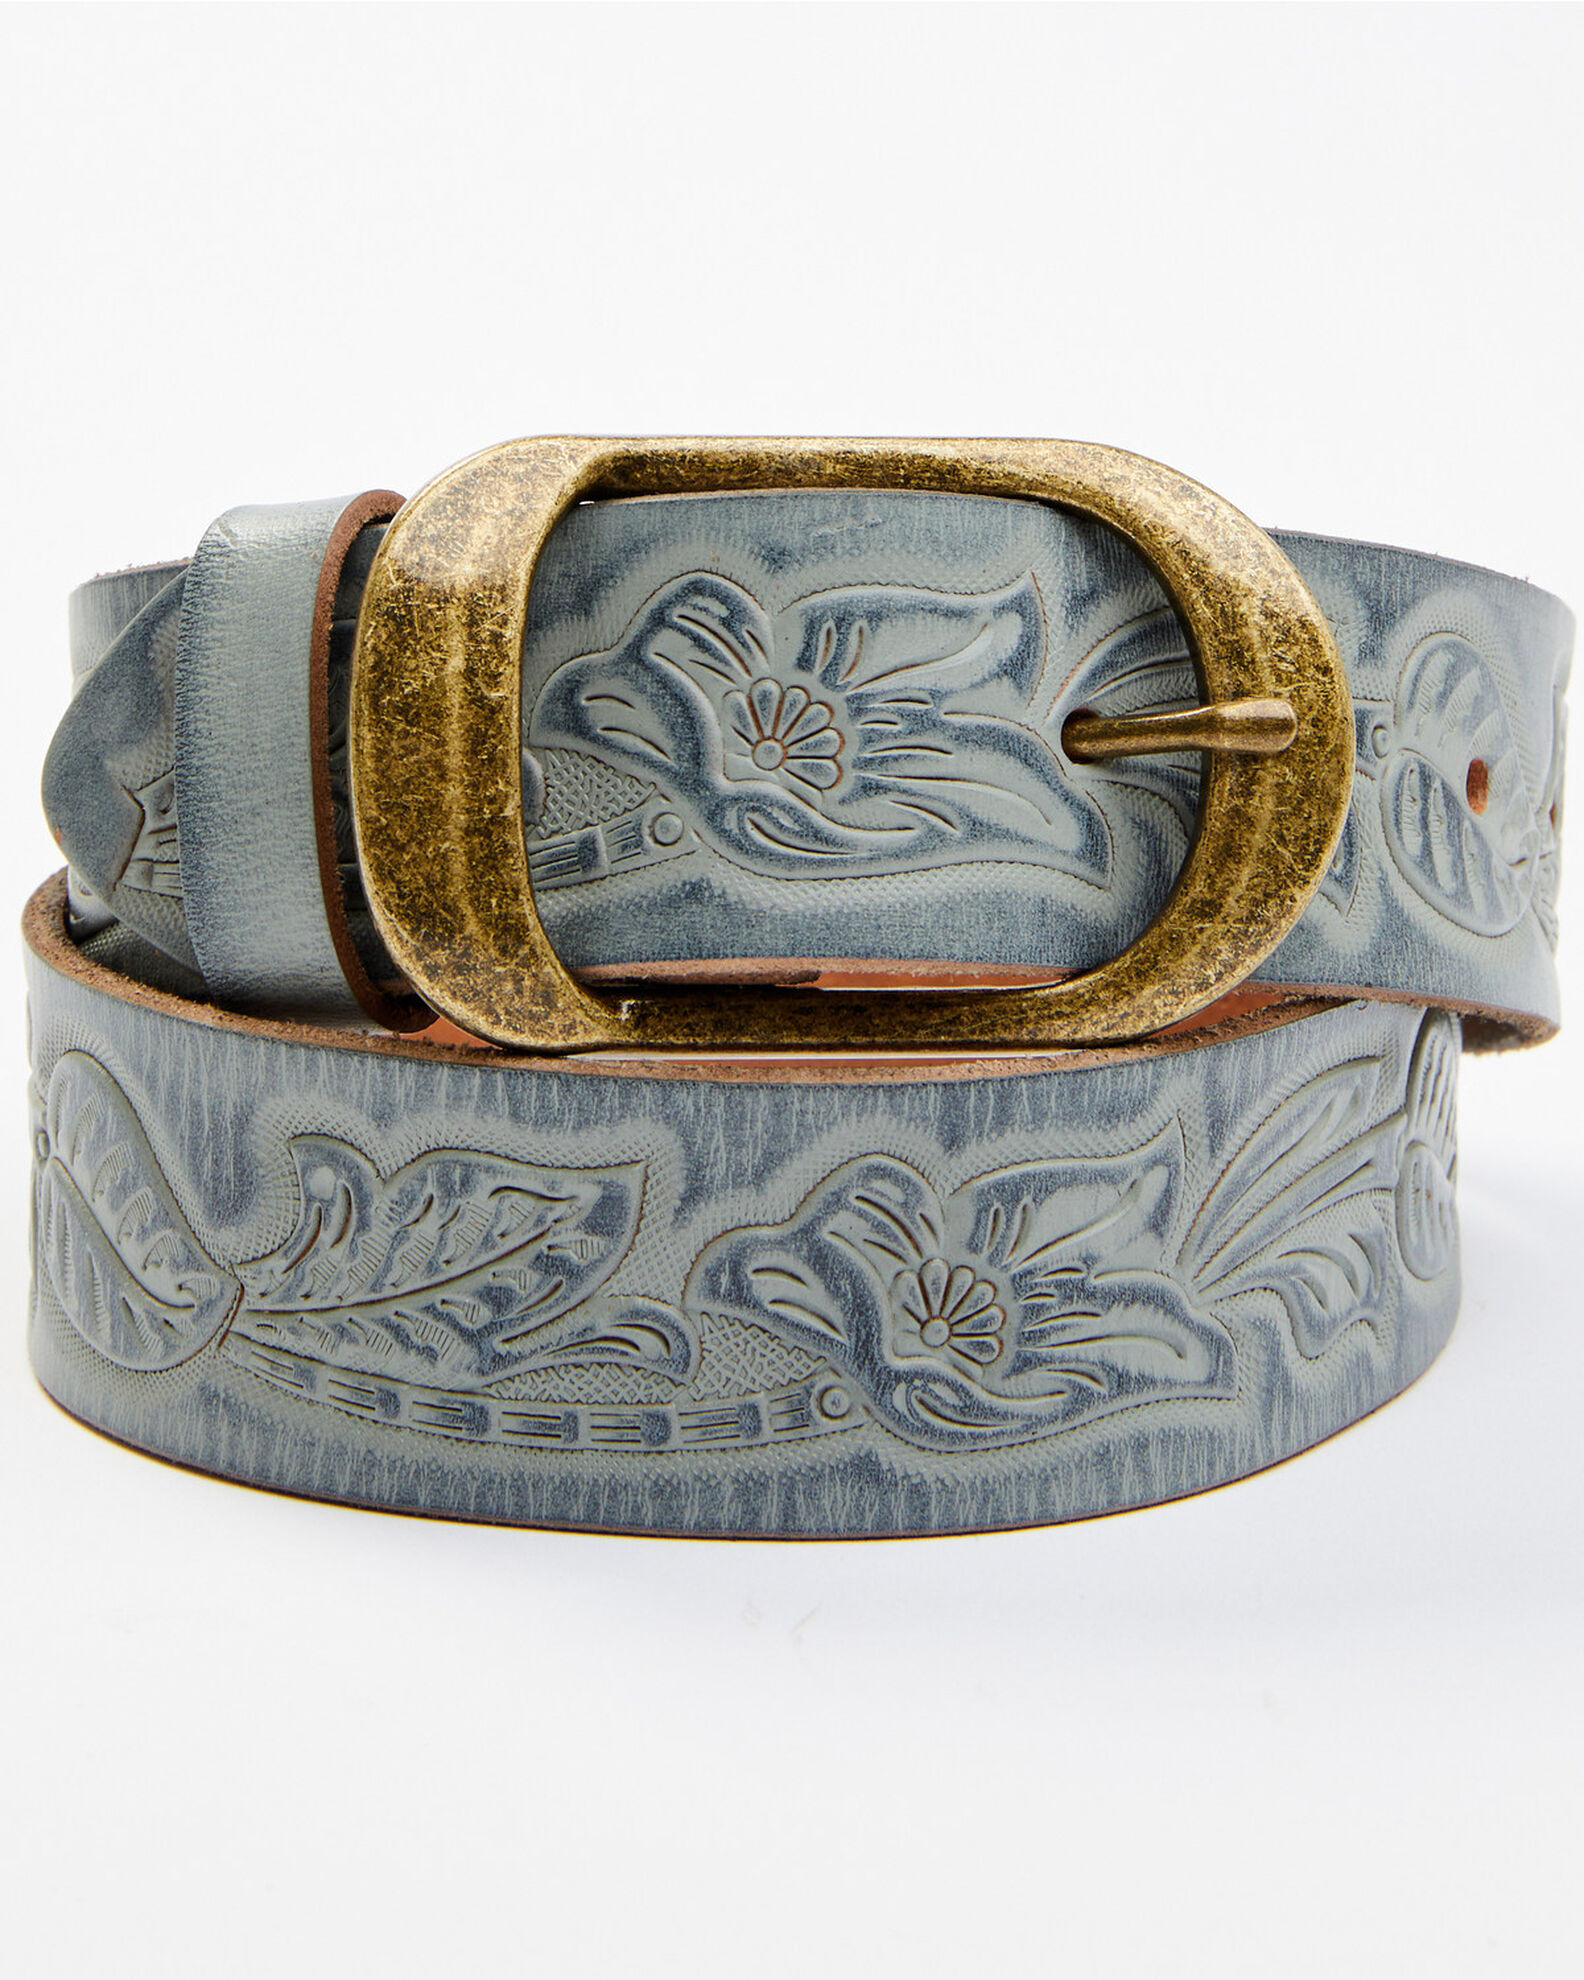 Cleo + Wolf Women's Tooled Leather Belt